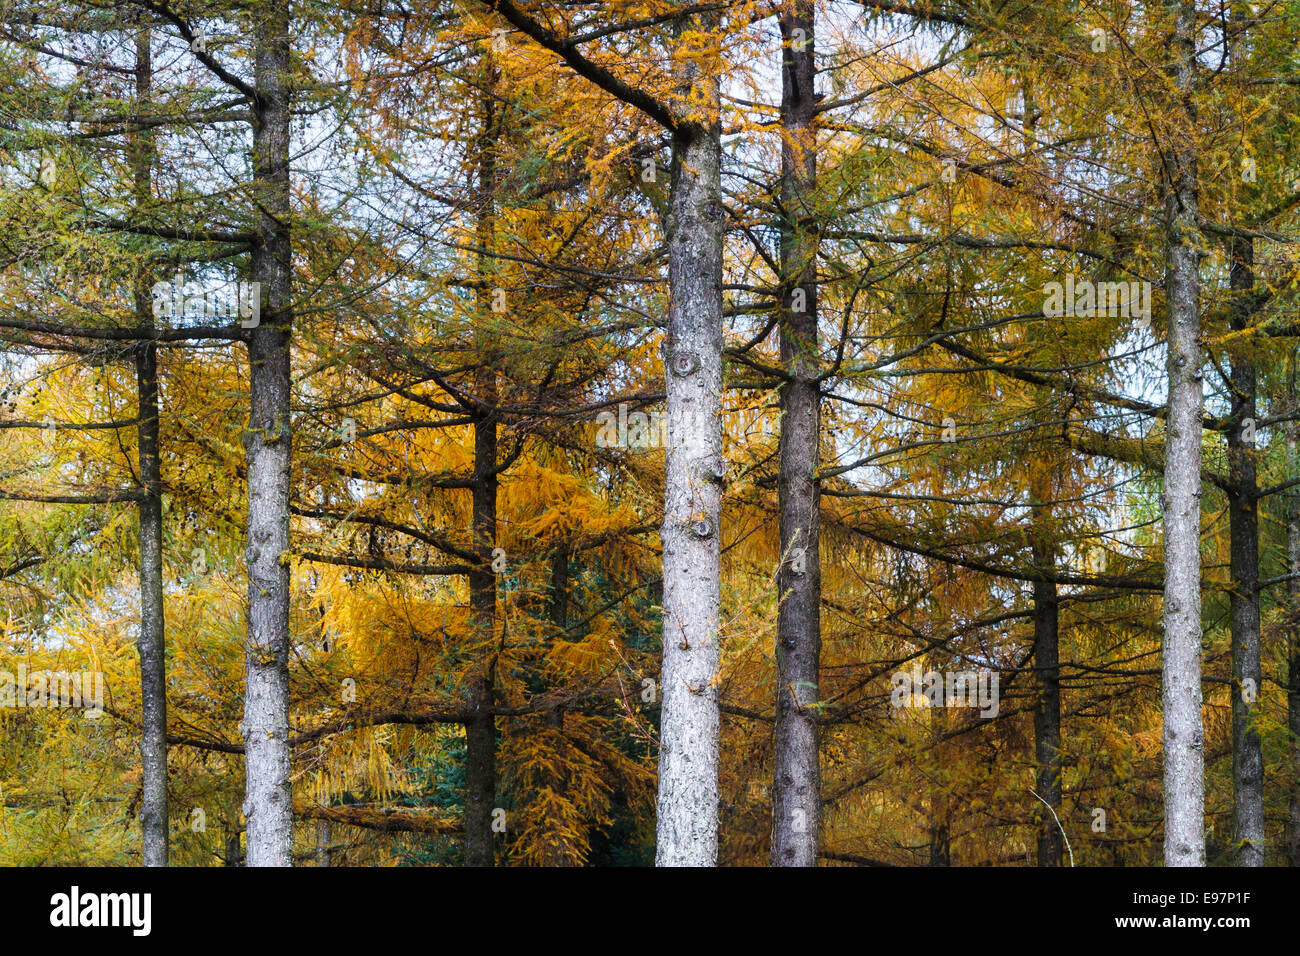 European larch (Larix decidua) forest in autumn. Gorbeia Natural Park. Biscay, Basque Country, Spain, Europe. Stock Photo